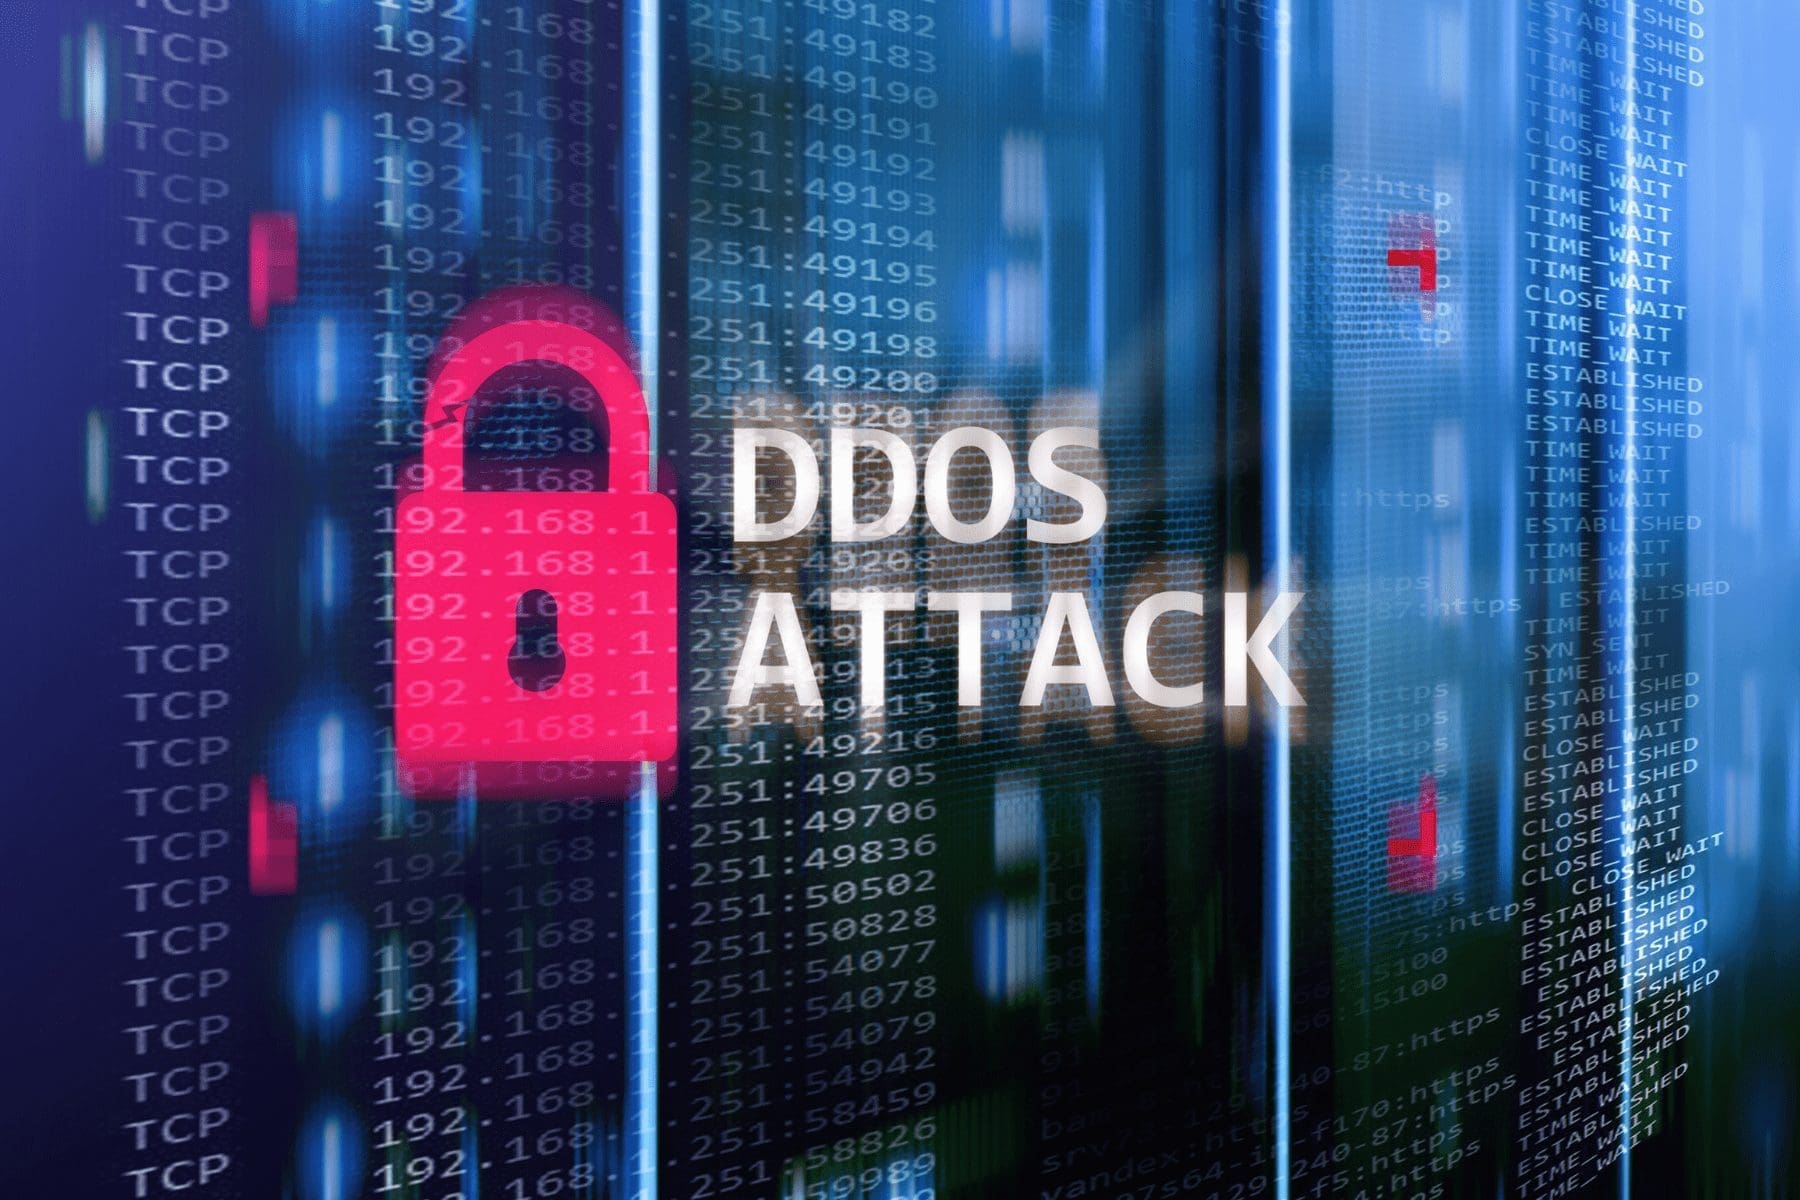 a depiction of a DDoS attack and a networks traffic